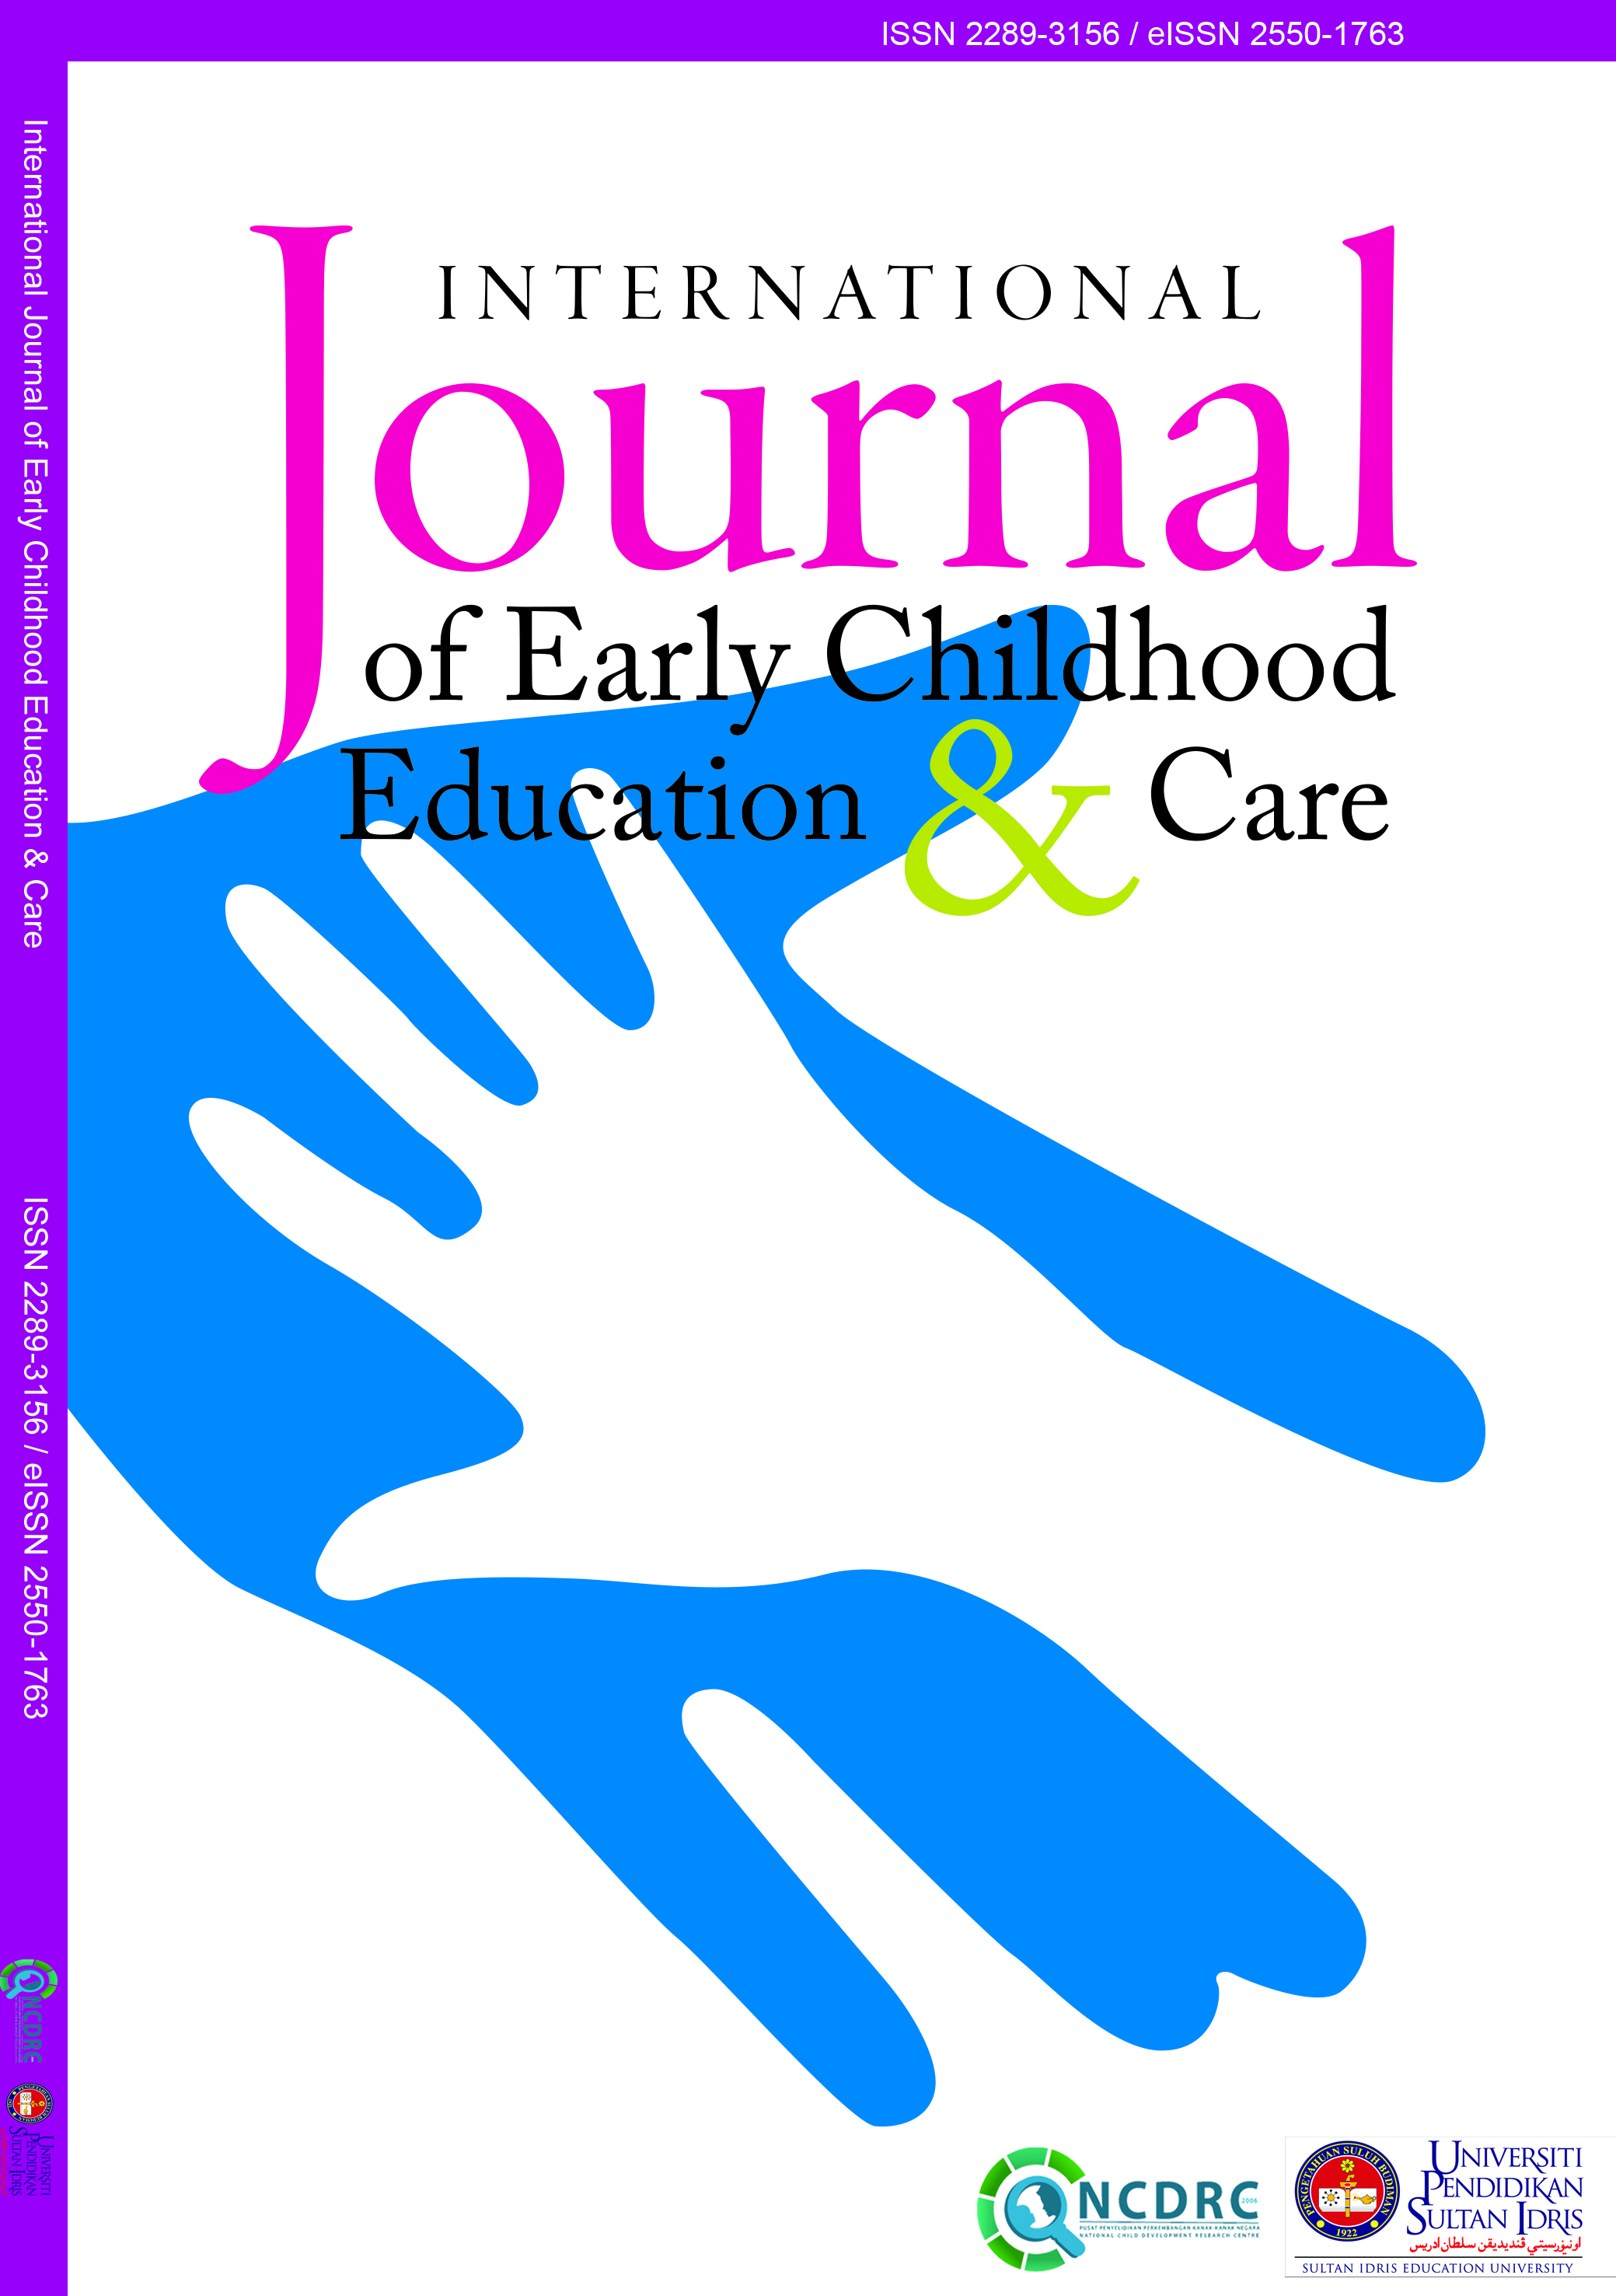 					View Vol. 7 (2018): International Journal of Early Childhood Education and Care
				